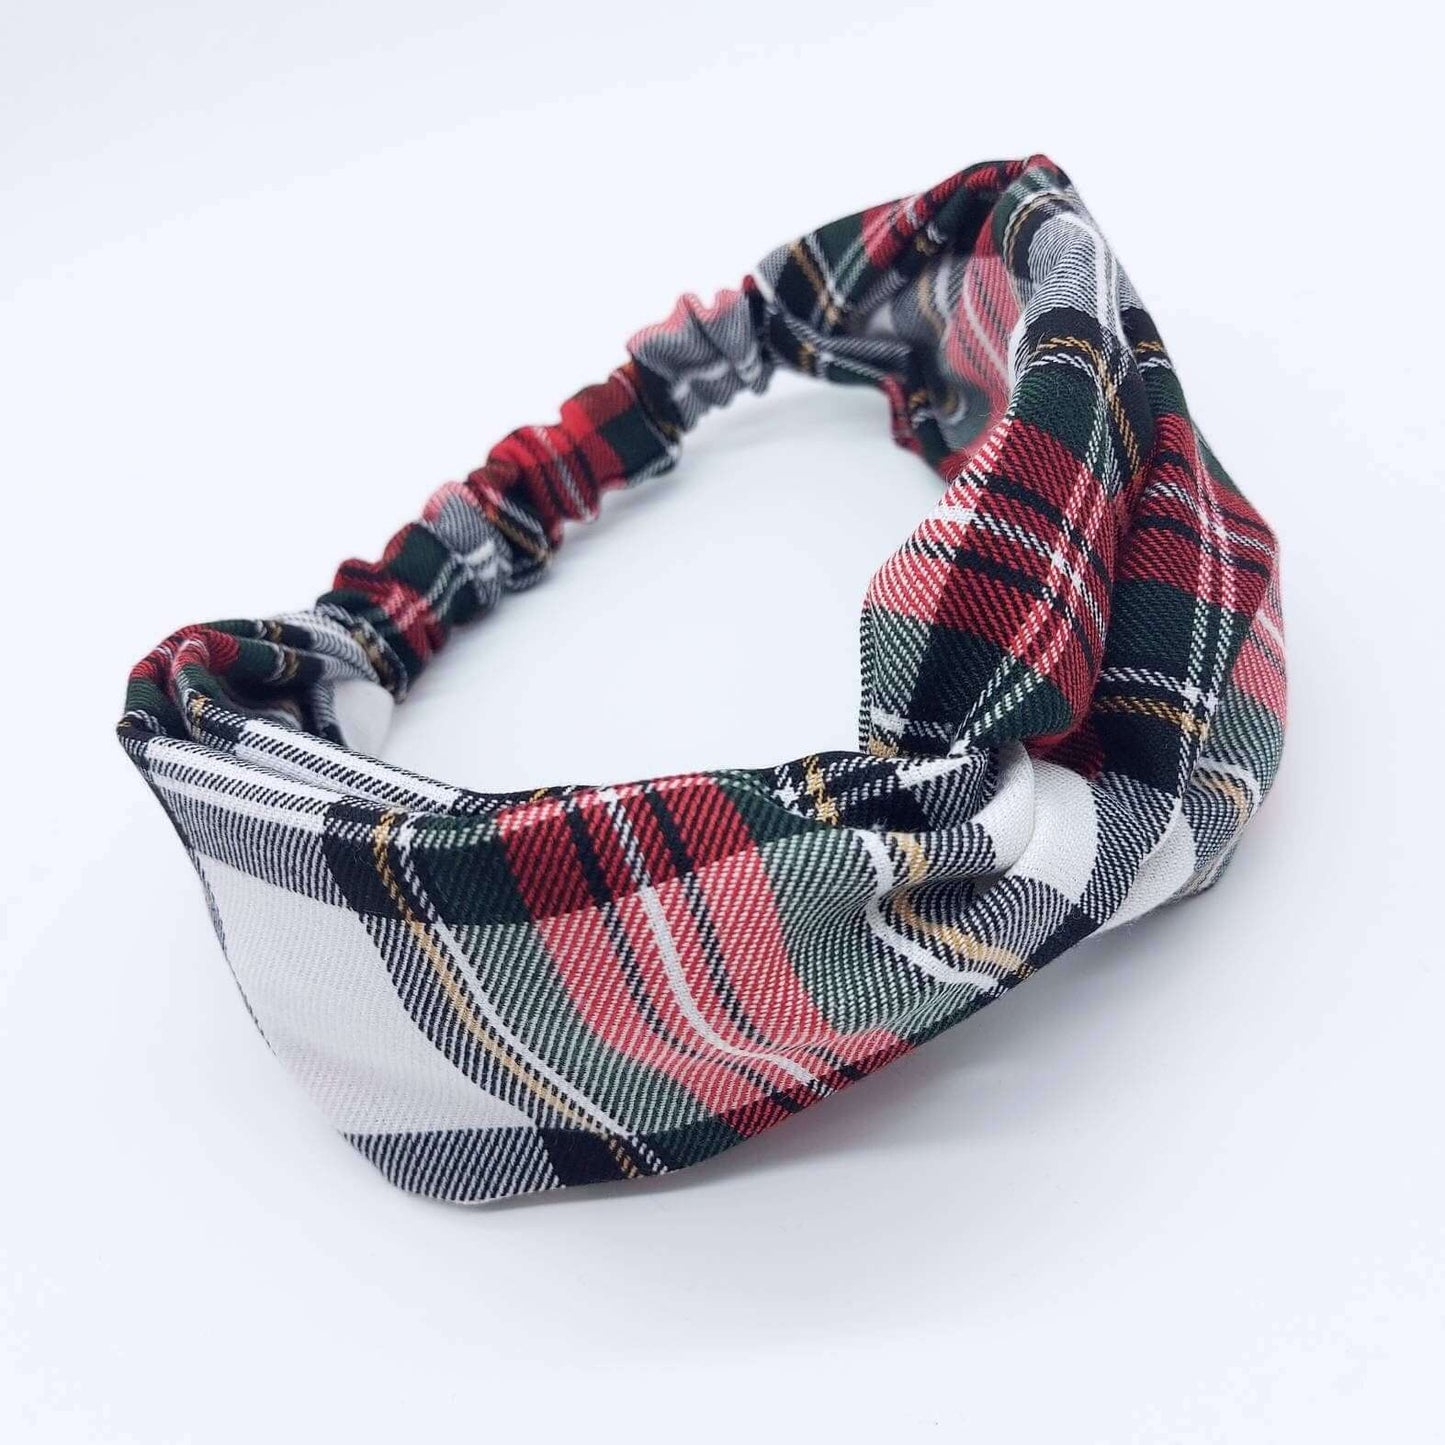 A soft, red and white, plaid tartan check, elasticated fabric headband, with a turban twist design at the front.